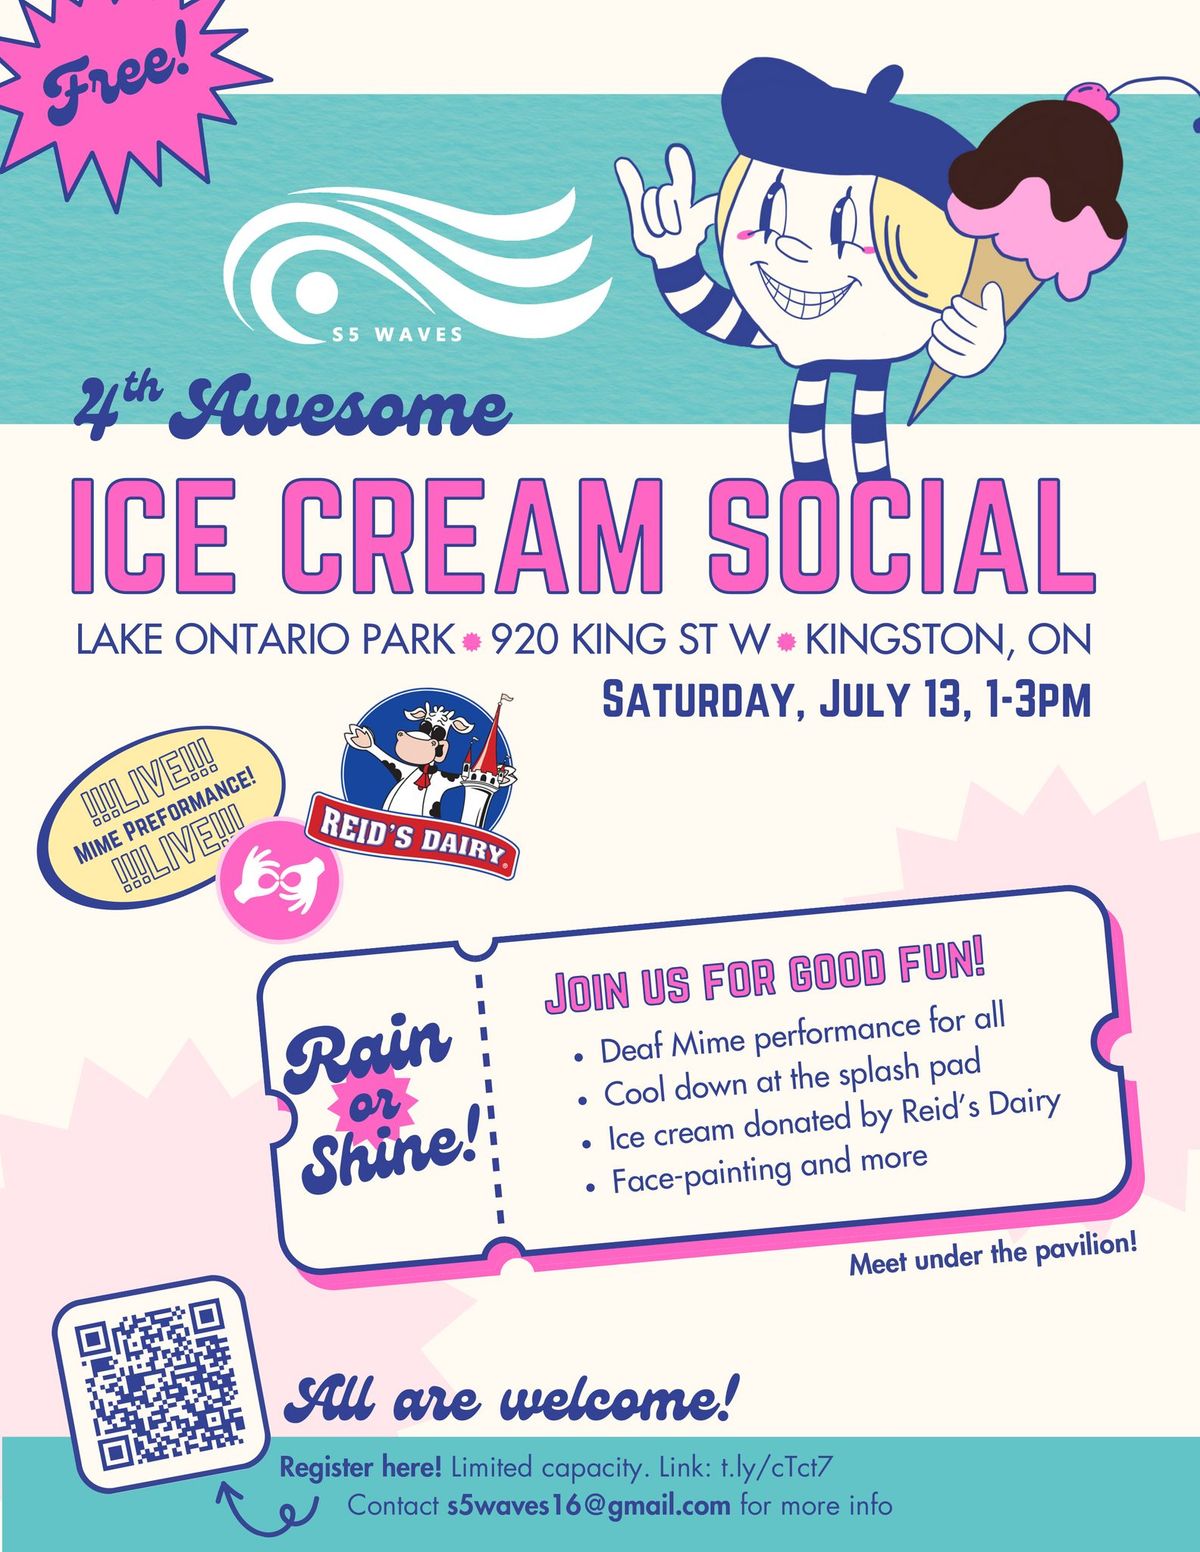 4th Awesome Ice Cream Social